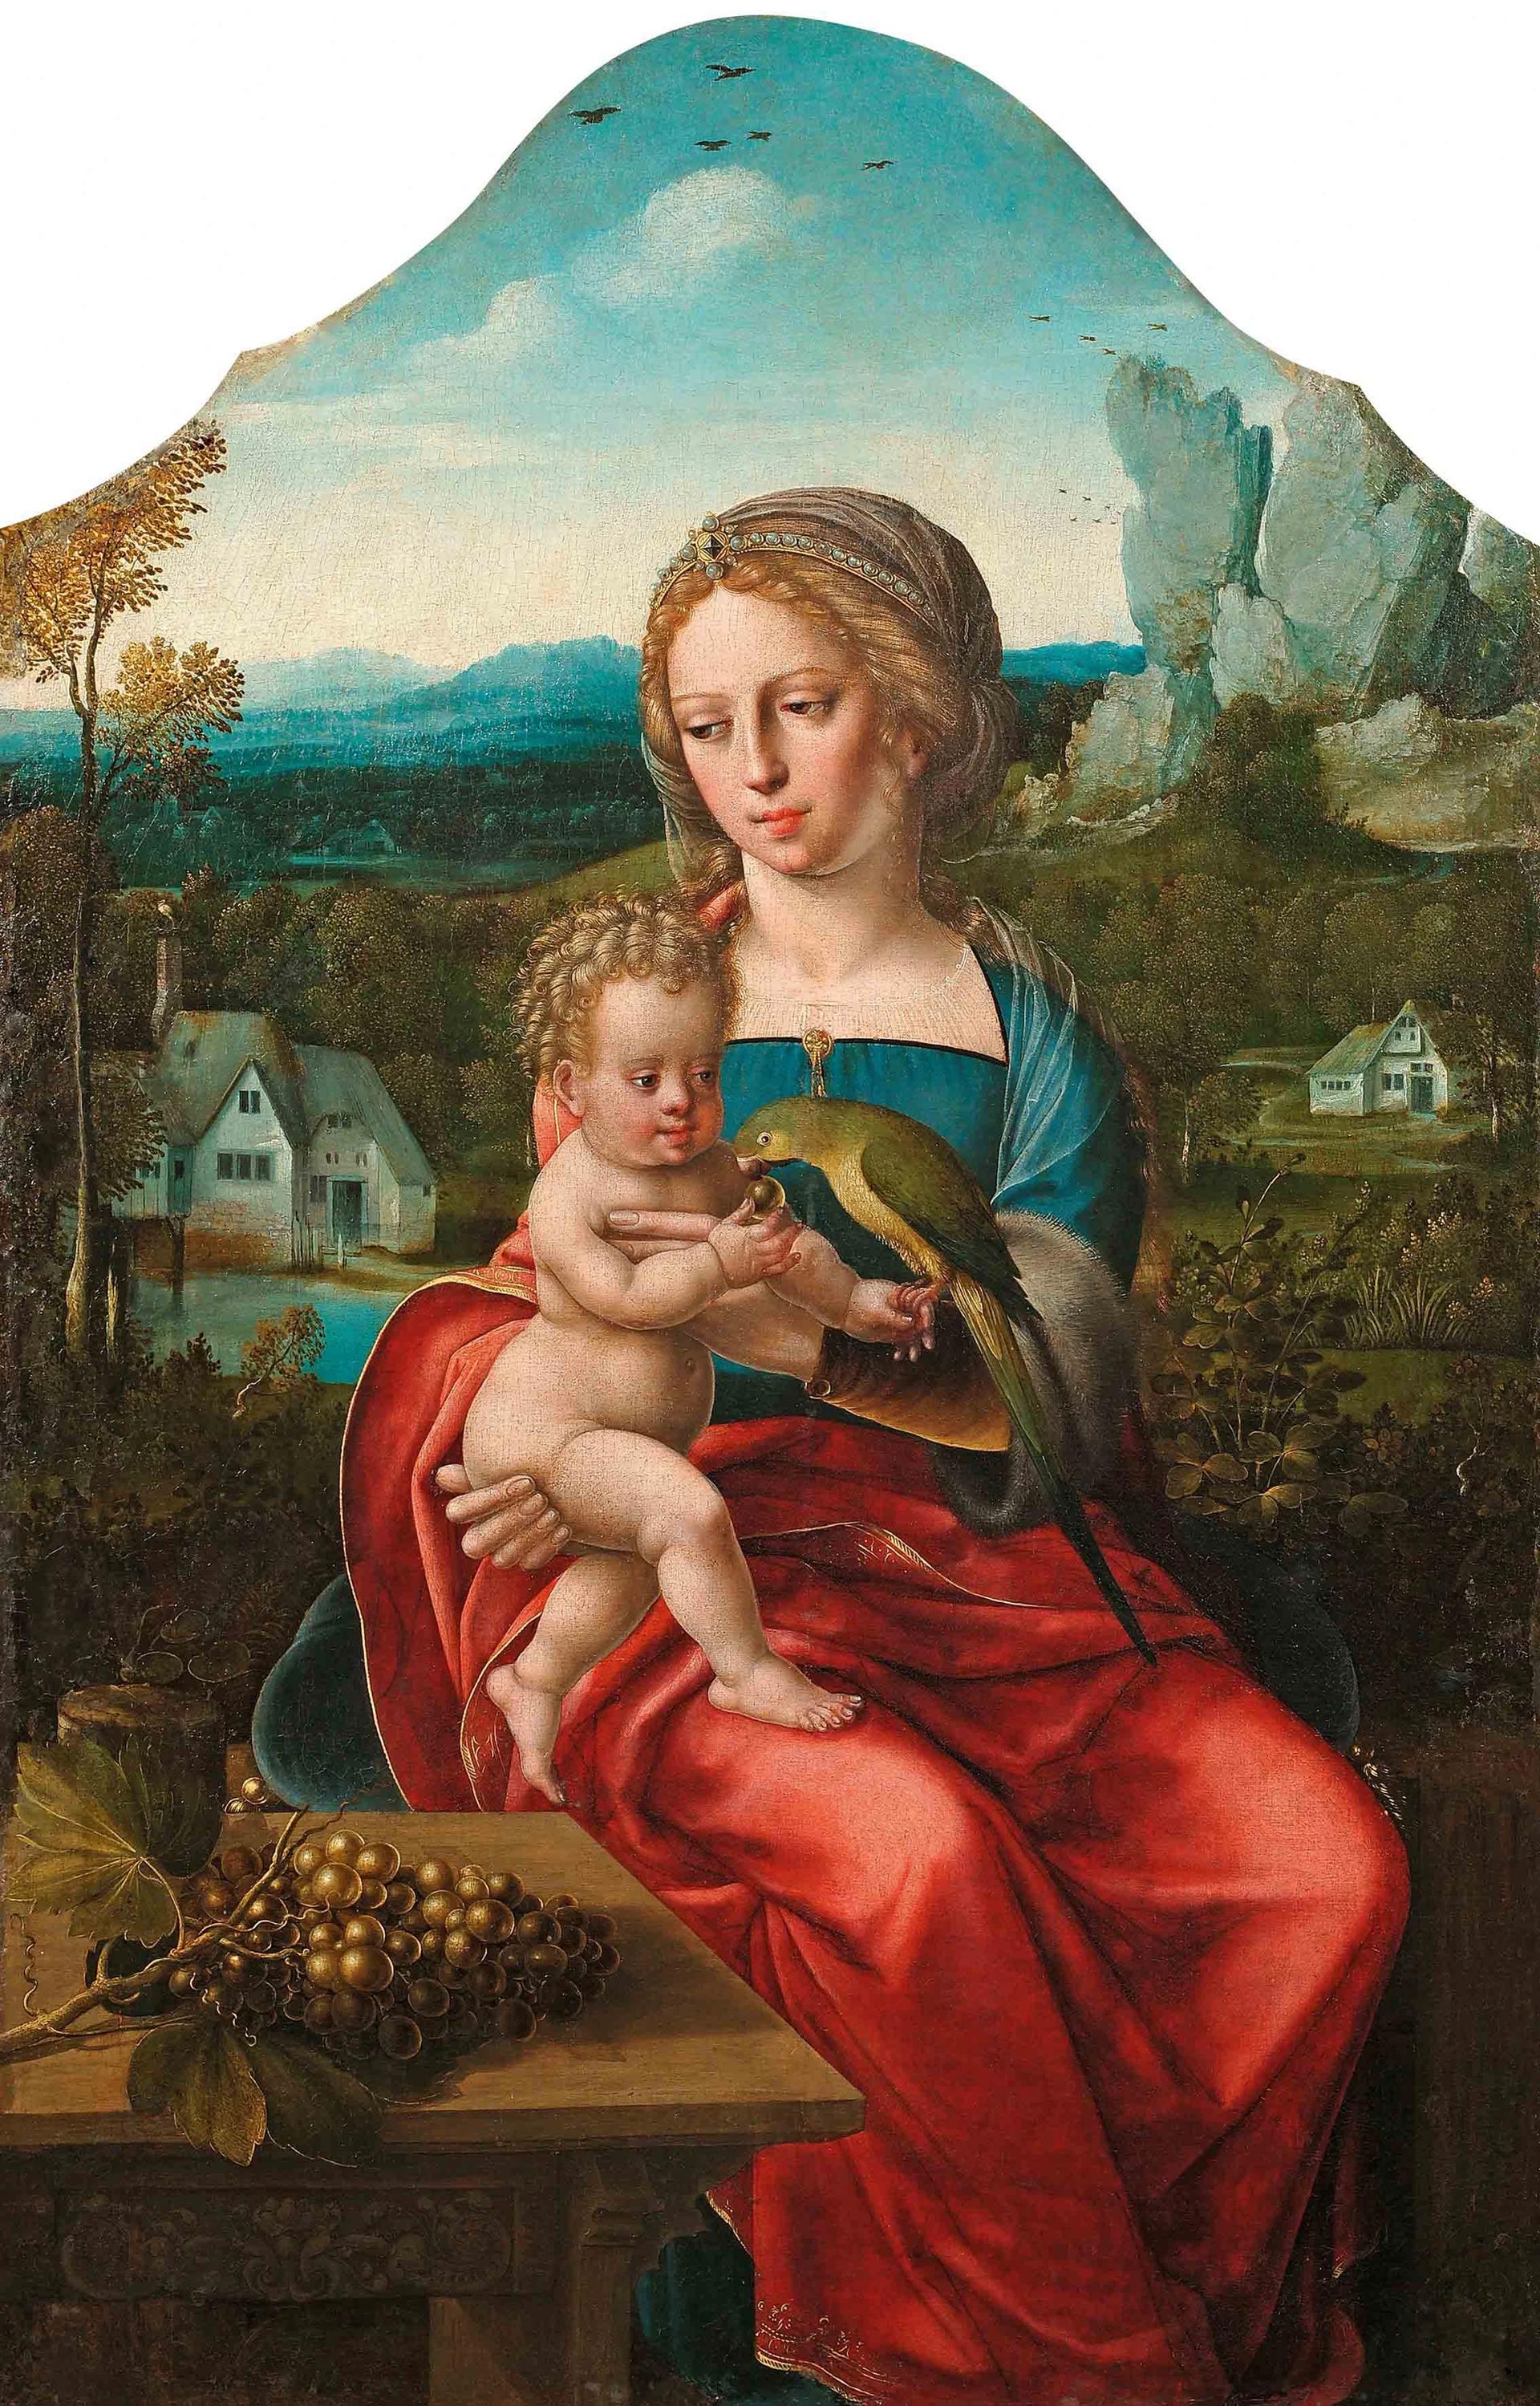 Virgin and Child with a Parrot, consigned by Galerie De Jonckheere, fetched €150,000 Courtesy of Christie's